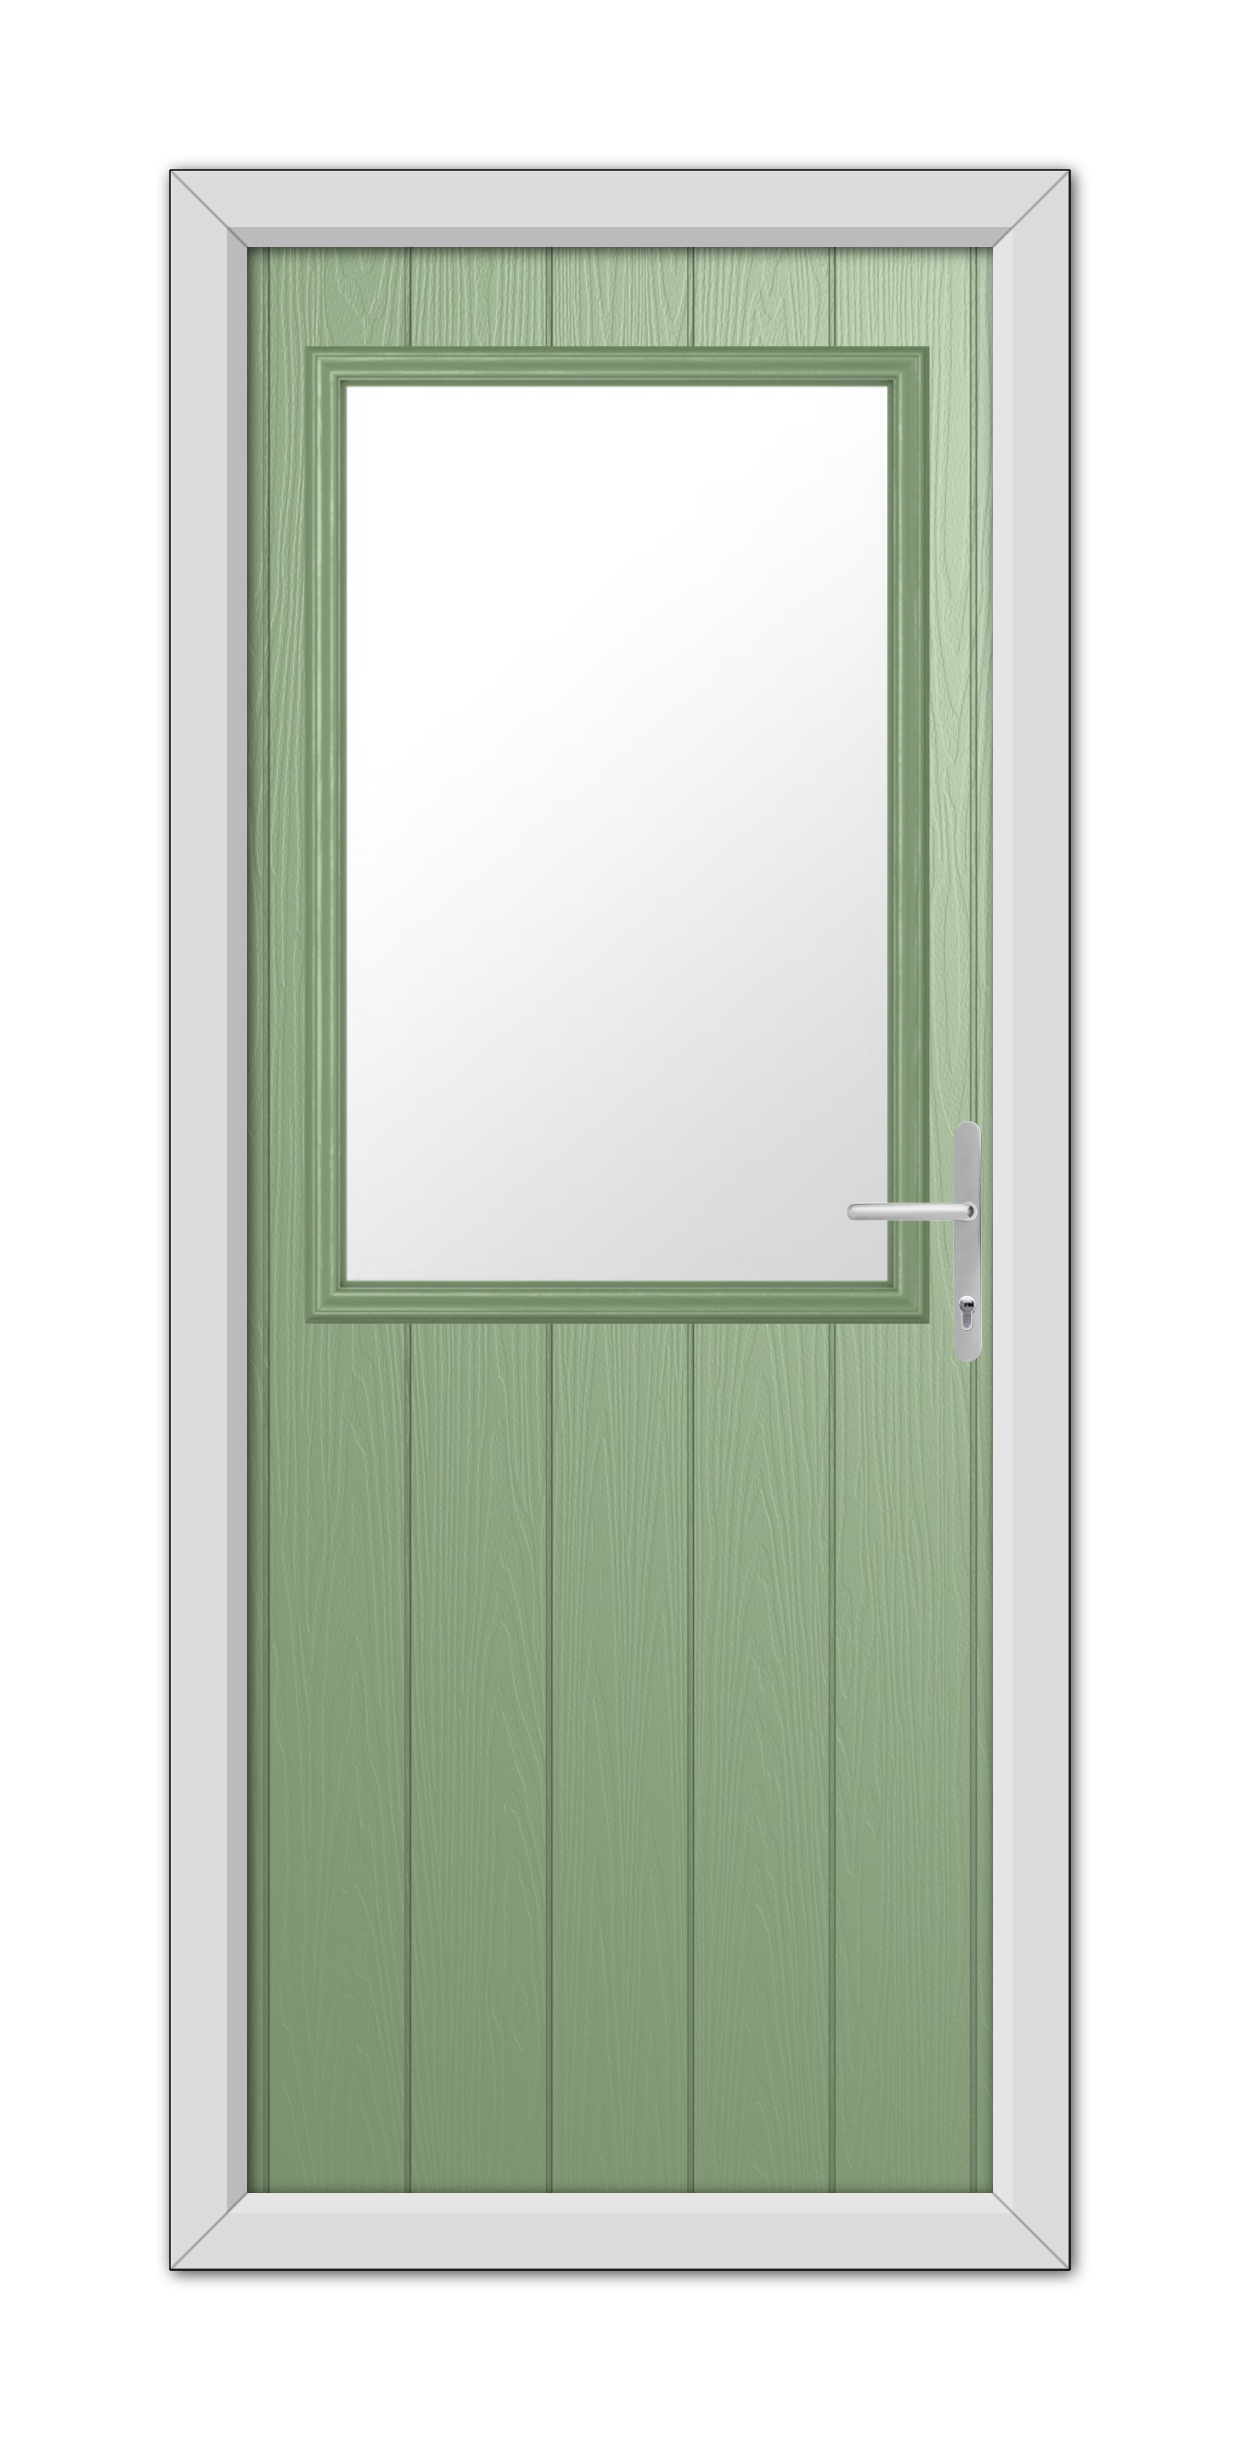 A Chartwell Green Clifton Composite Door 48mm Timber Core with a square window, set within a white frame, featuring a metallic handle on the right side.